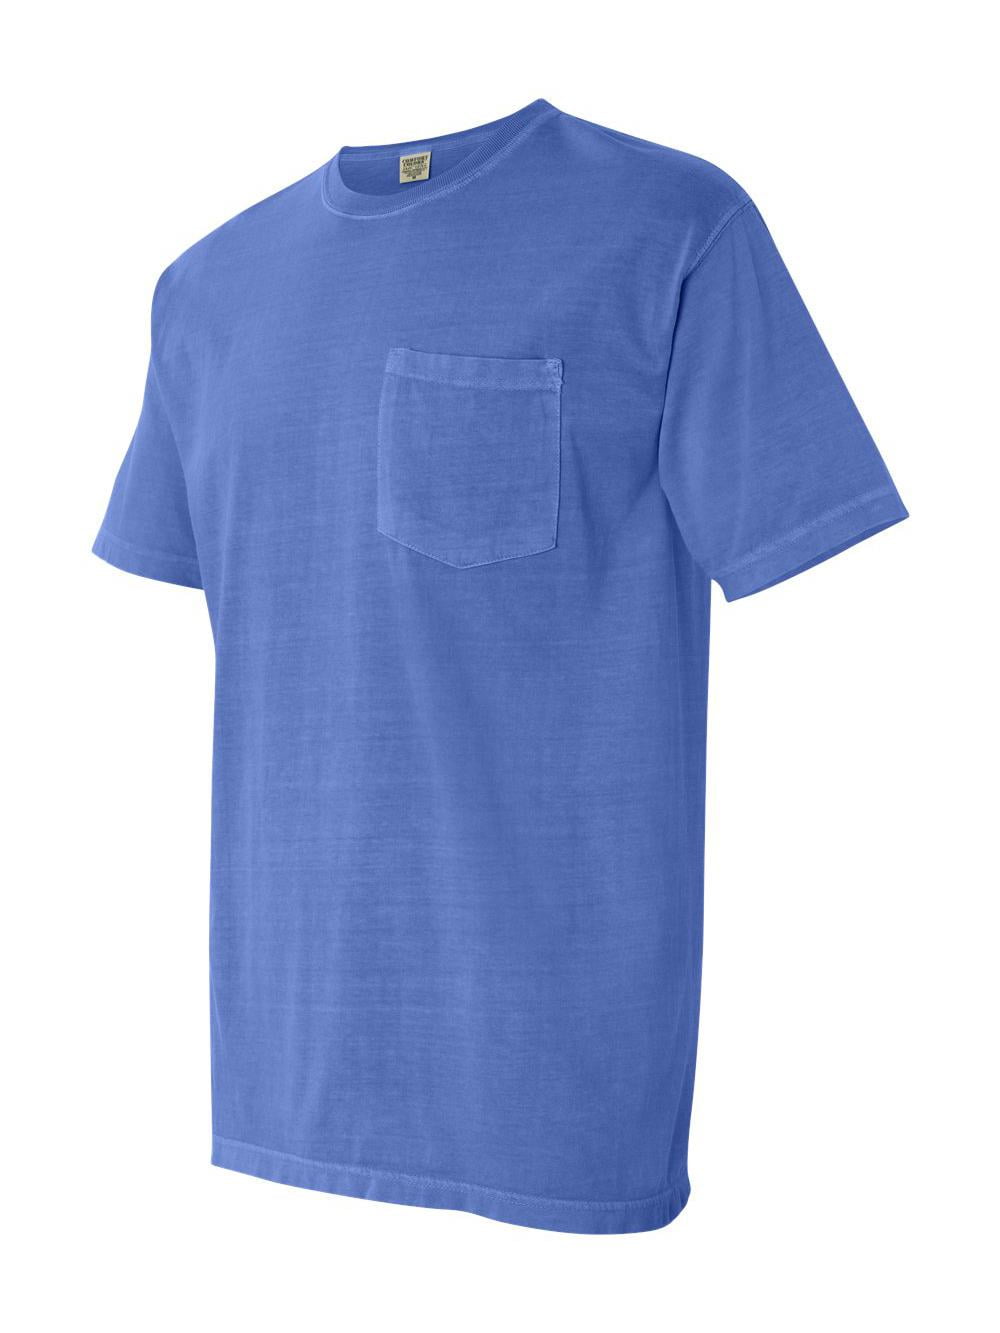 Comfort Colors Comfort Colors Garment Dyed Heavyweight Pocket T